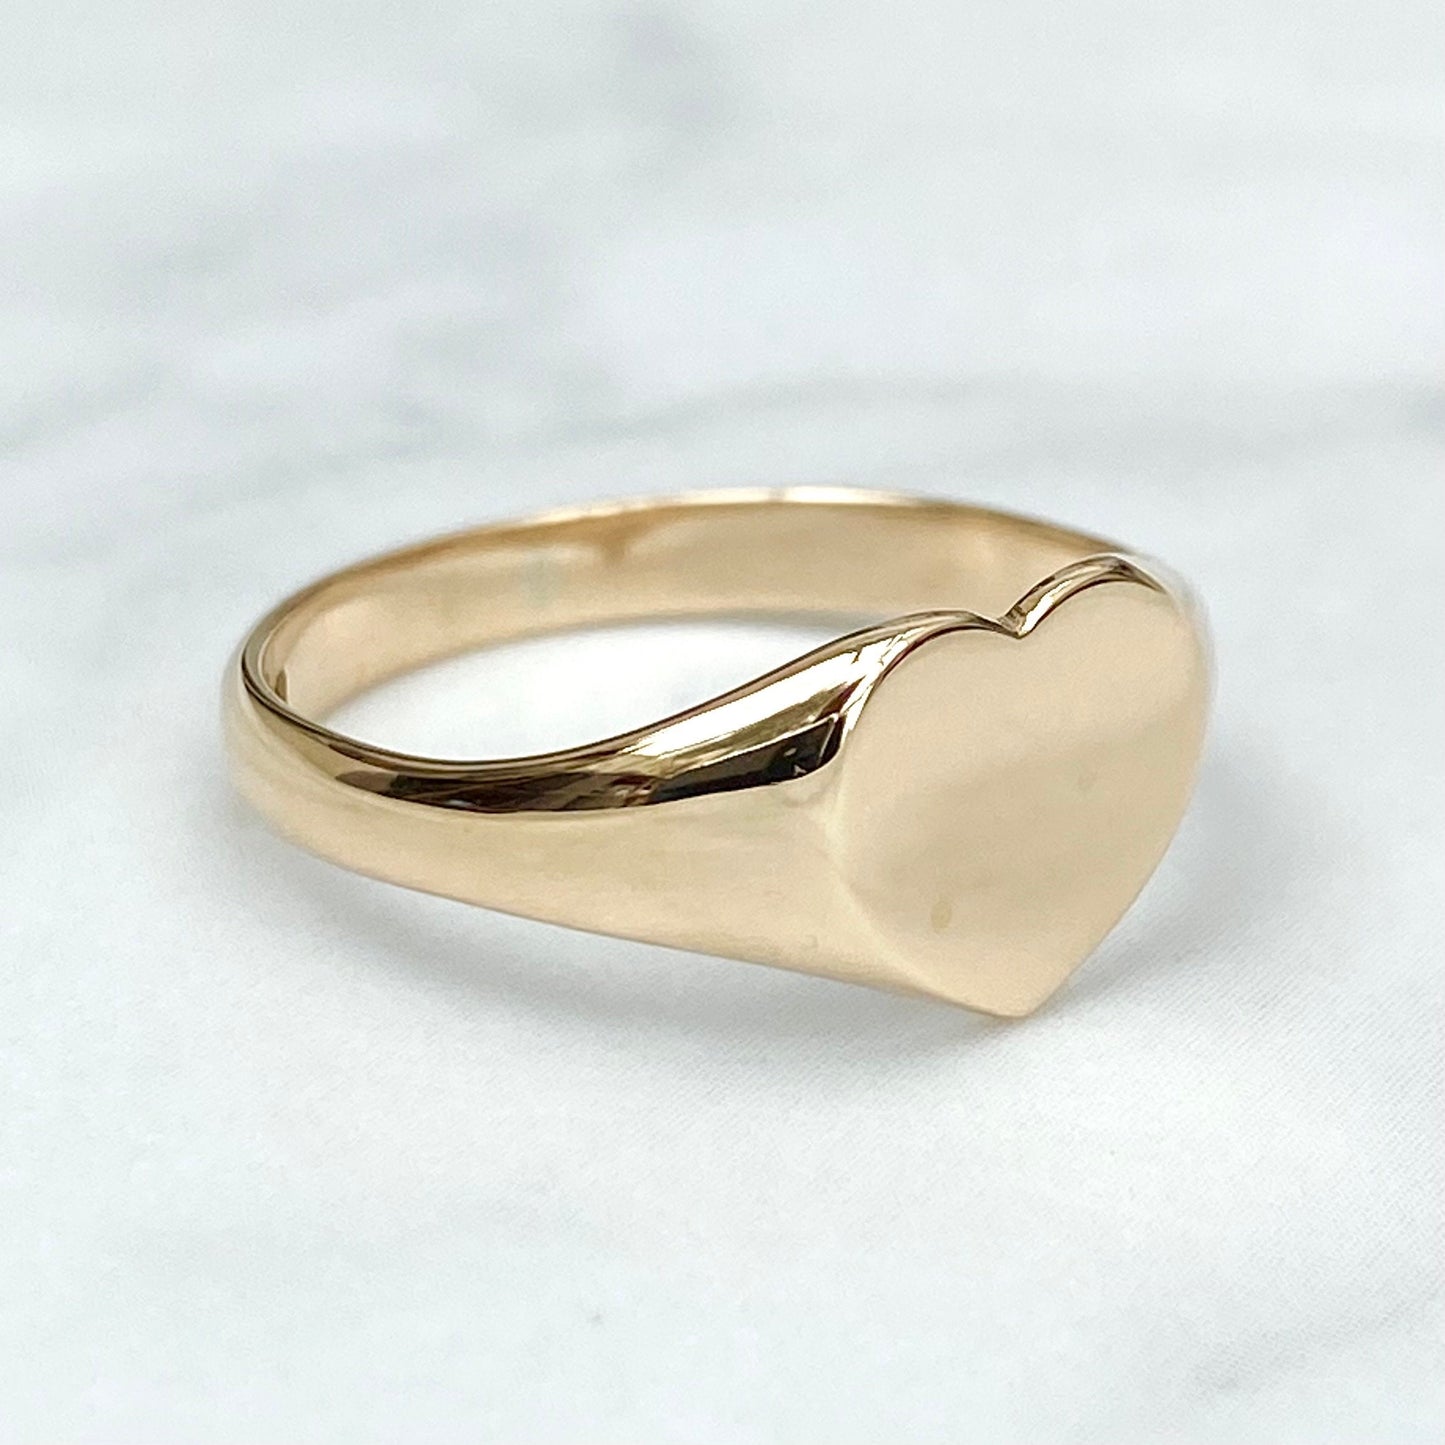 Vintage 9ct yellow gold heart signet ring